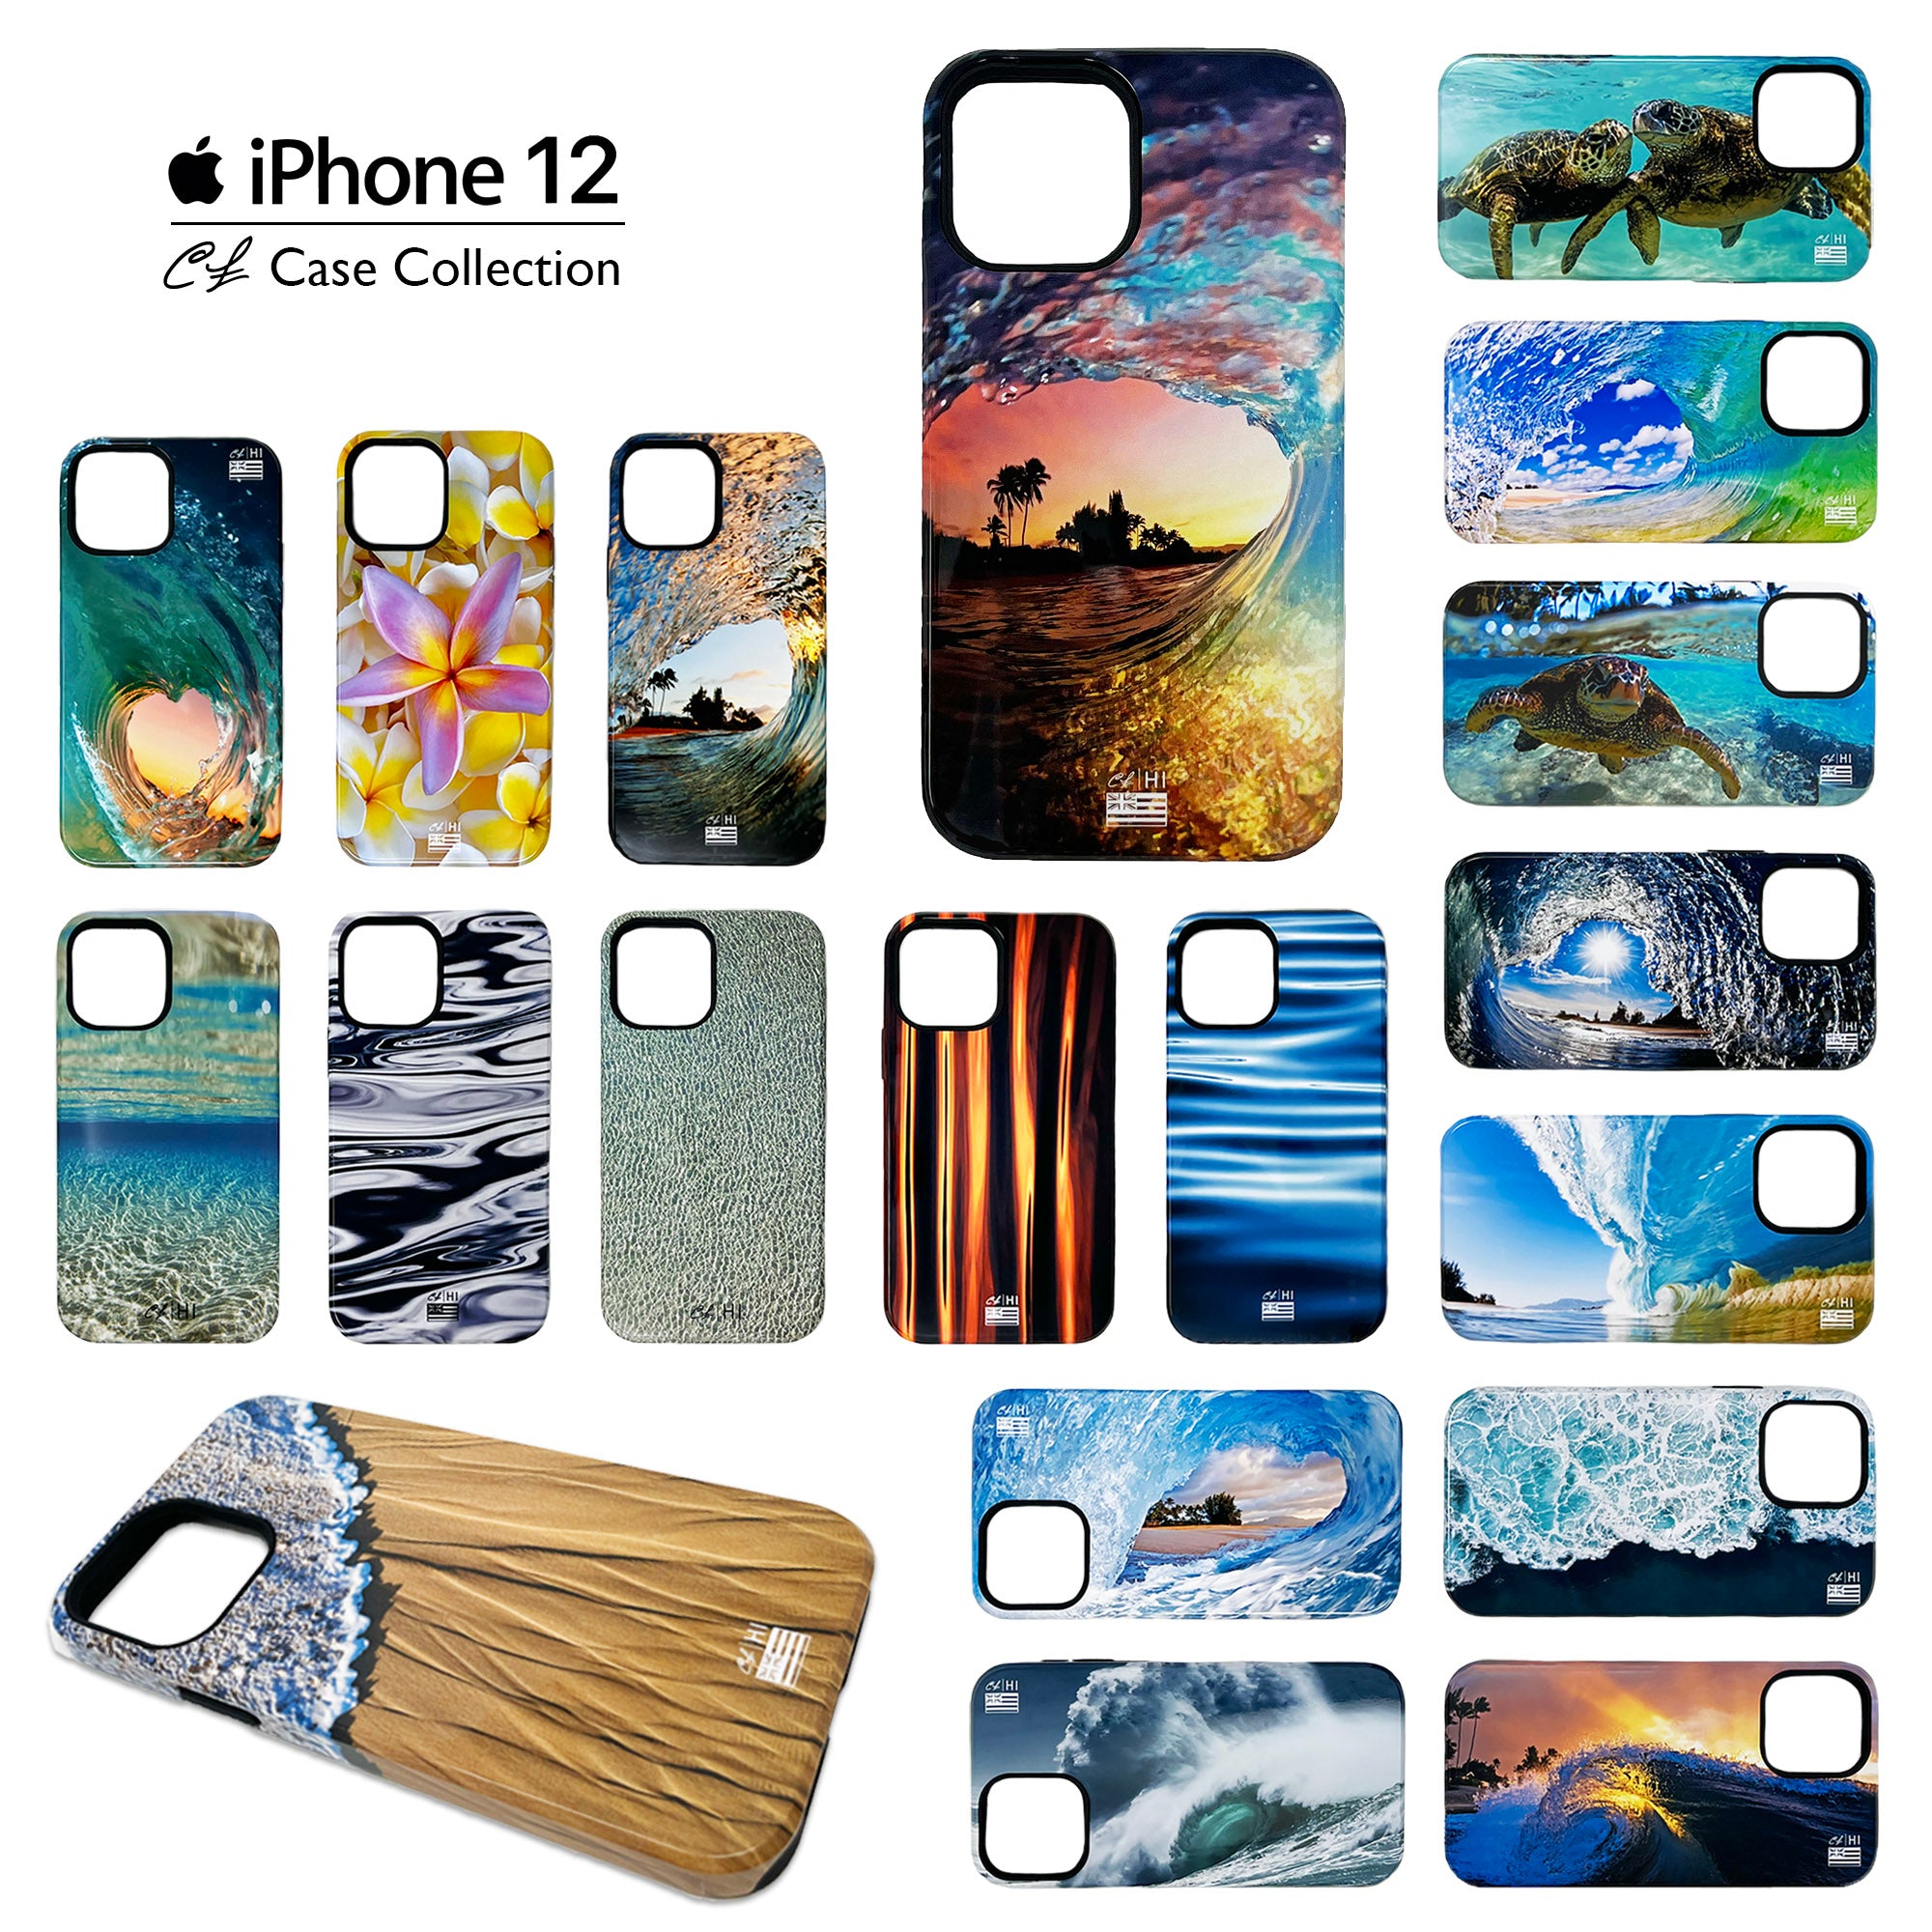 iPhone 12 & 12 Pro Cases: Heart - Clark Little Photography